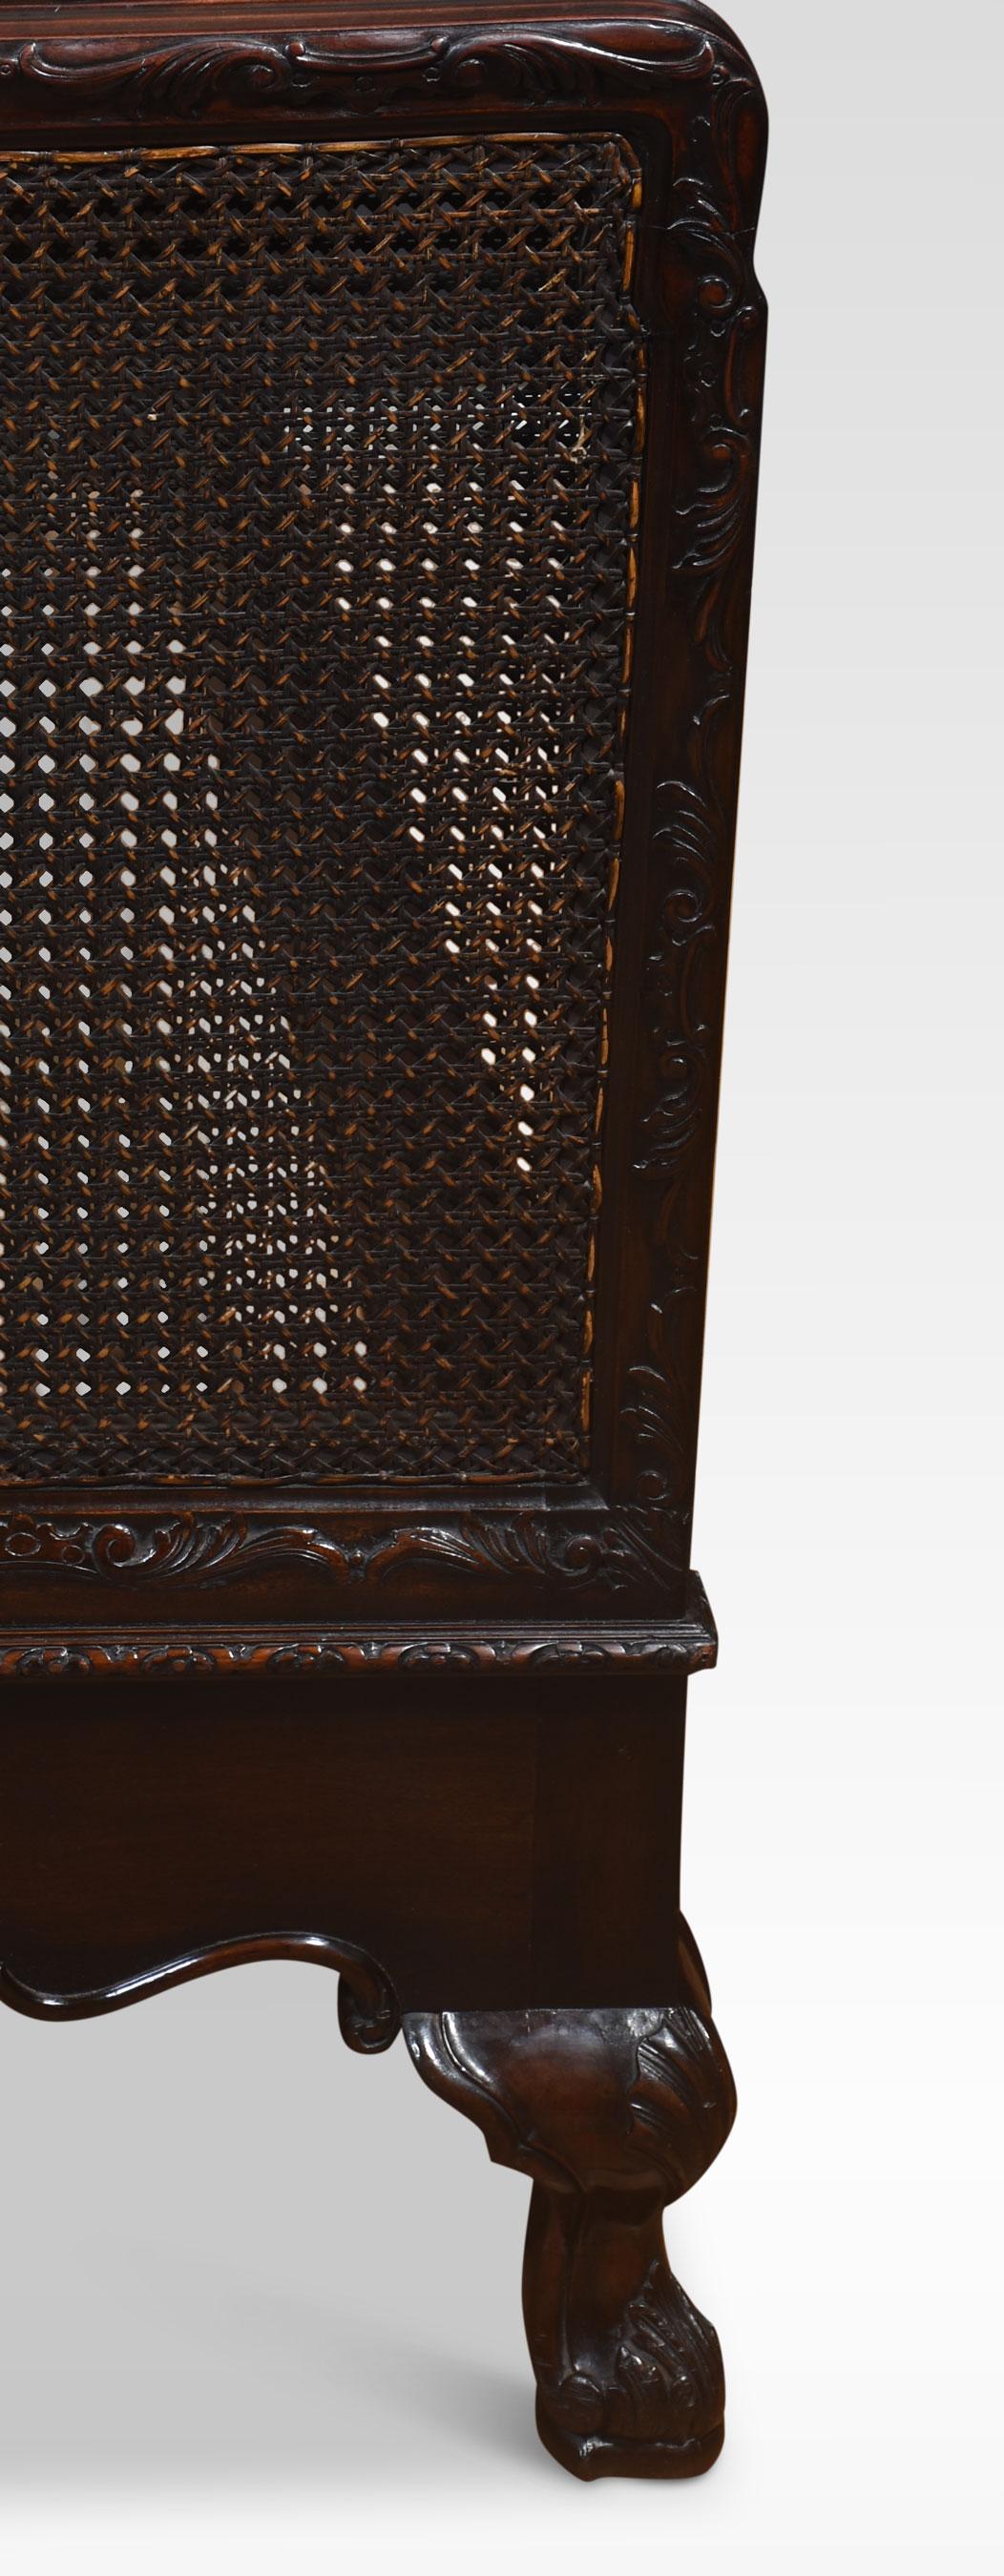 Heals of London carved mahogany bed, the crest rail well carved with acanthus leaves having inset double bergere inset panels. All raised on cabriole supports terminating in claw and ball feet.
Dimensions
Height 53 Inches
Width 62 Inches
Depth 83.5